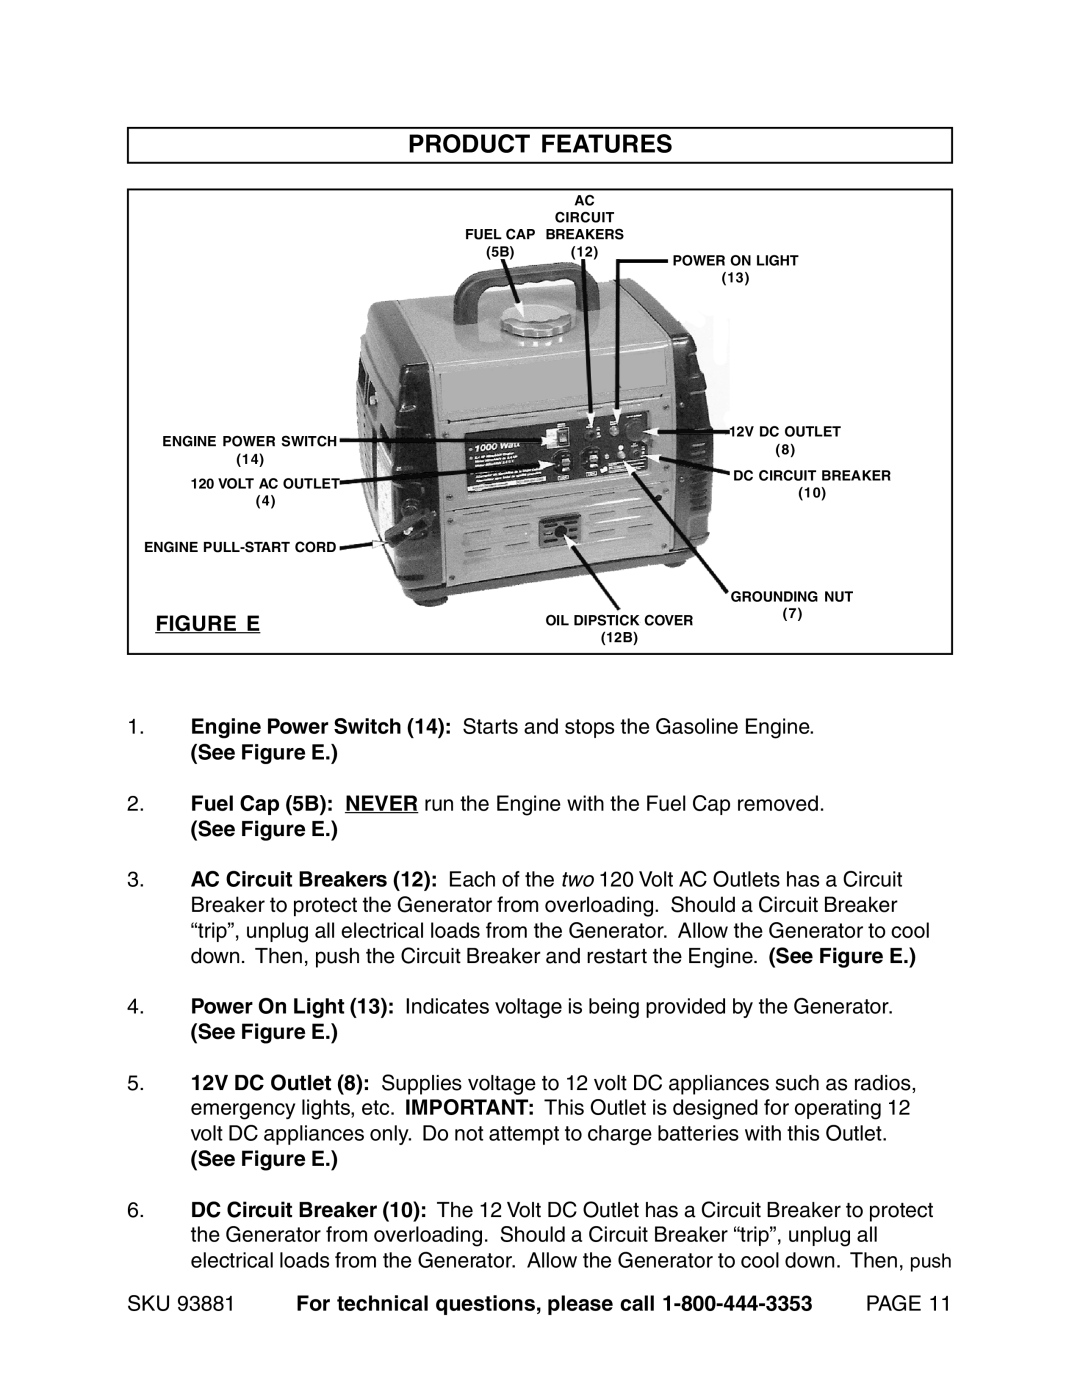 Chicago Electric 93881 operating instructions Product Features, See Figure E, For technical questions, please call 